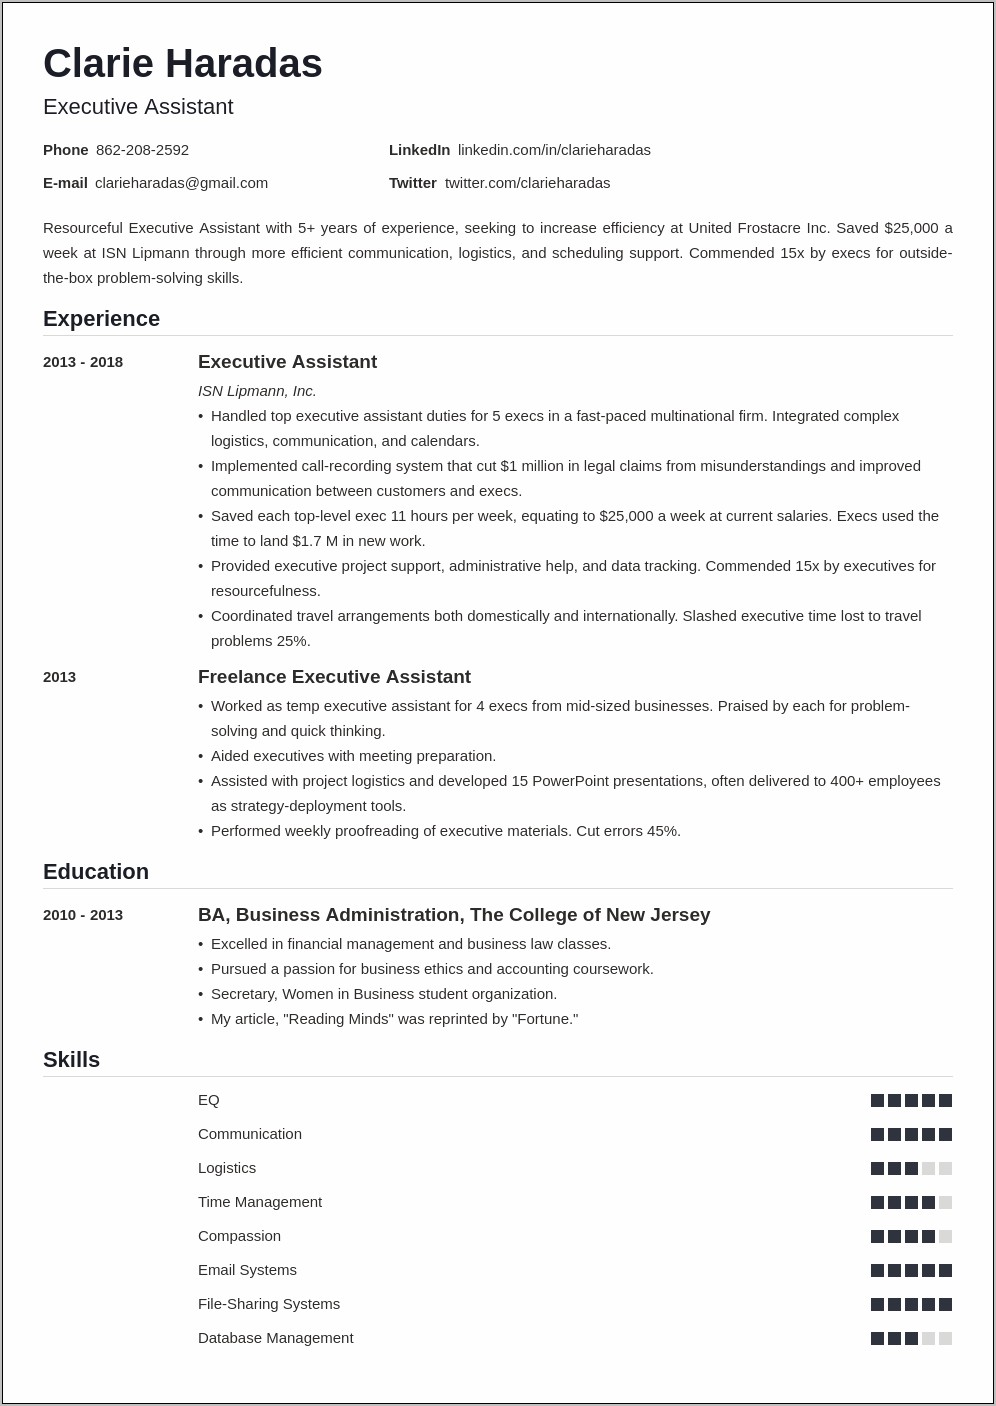 Executive Assistant Resume Samples 2013